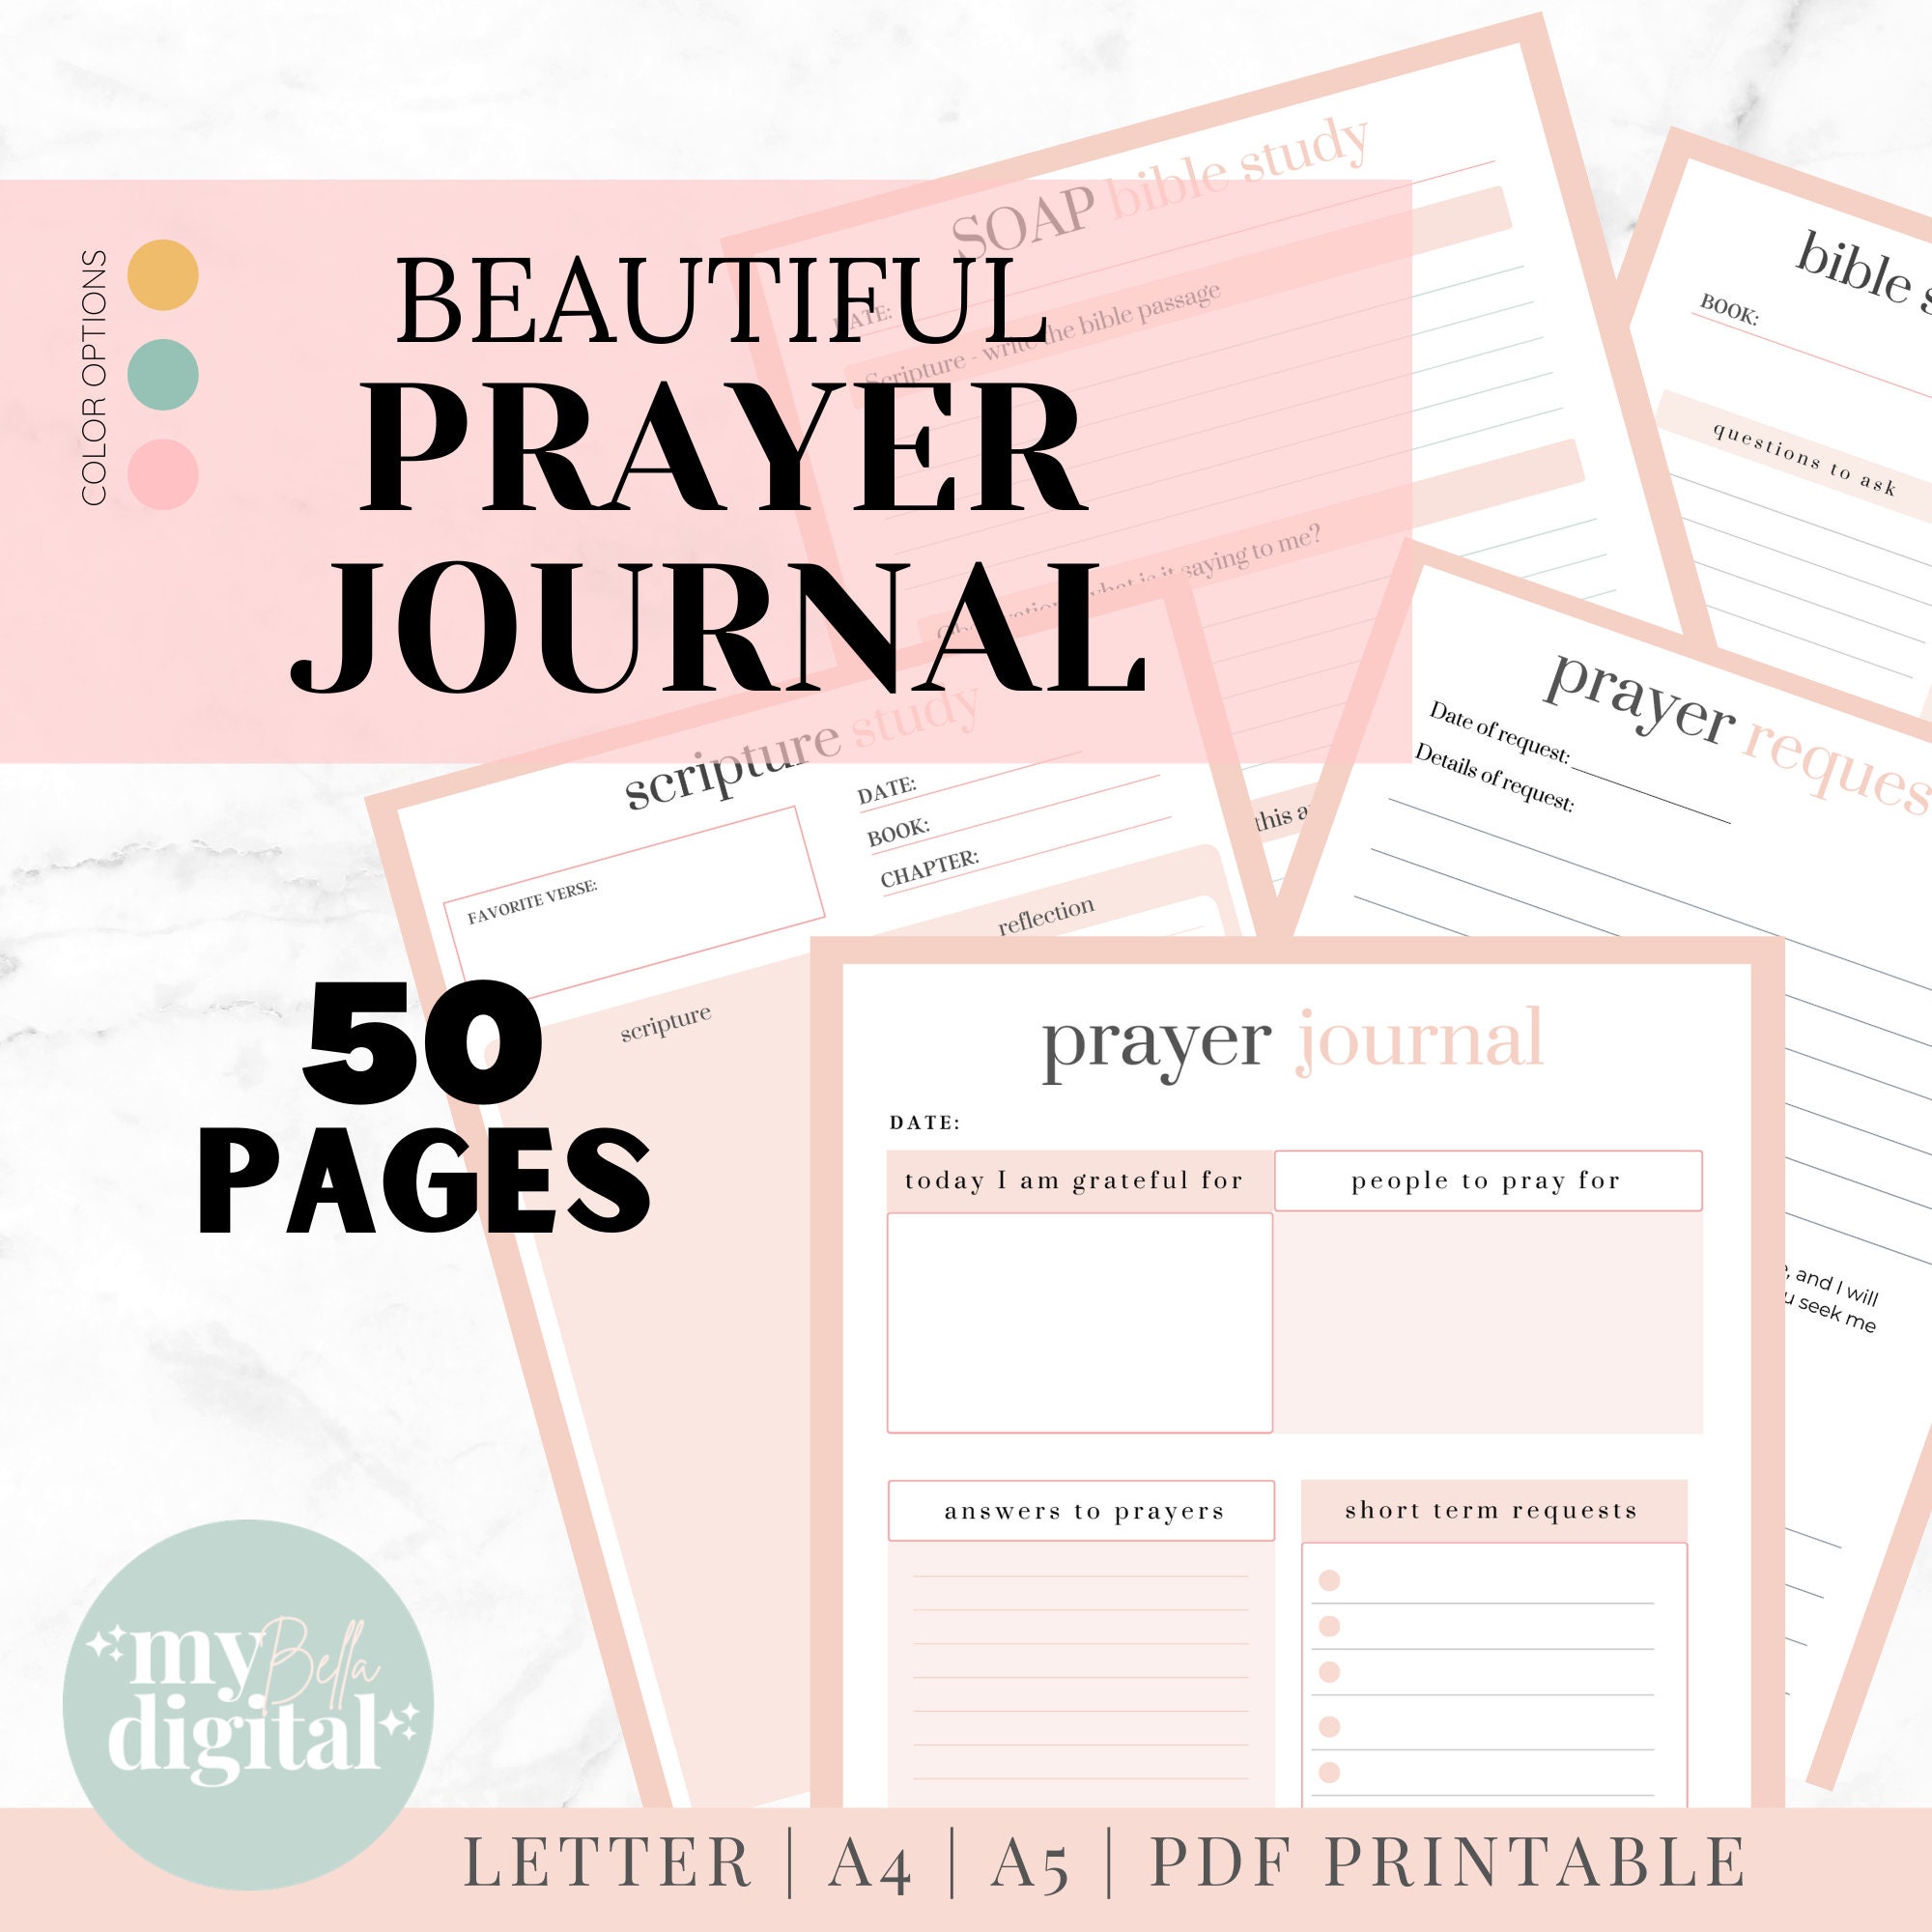 Printable Prayer Board Kit Sweet Edition Christian Church Prayer Group  Bible Verse Cards Craft Activity Instant Download 